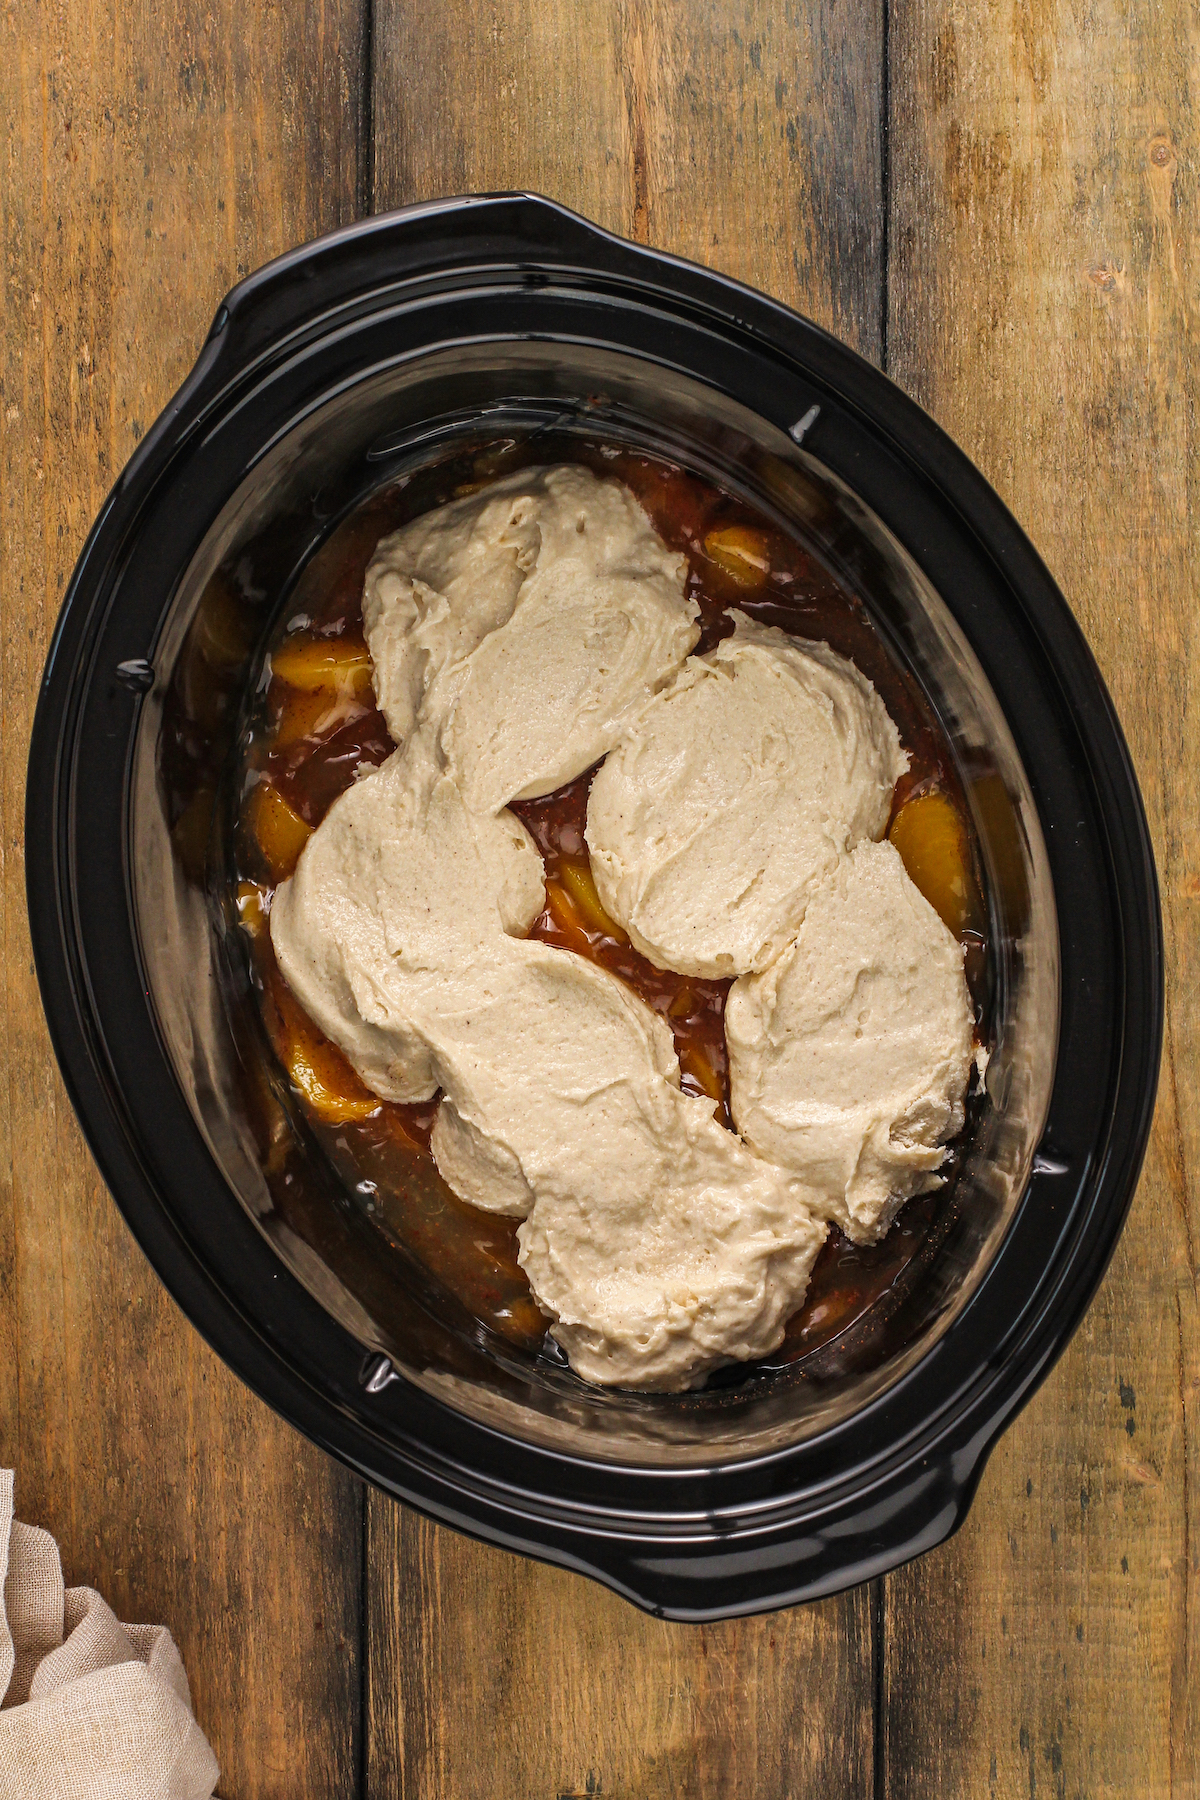 Peach filling topped with spoonfuls of cobbler batter inside a crock pot.